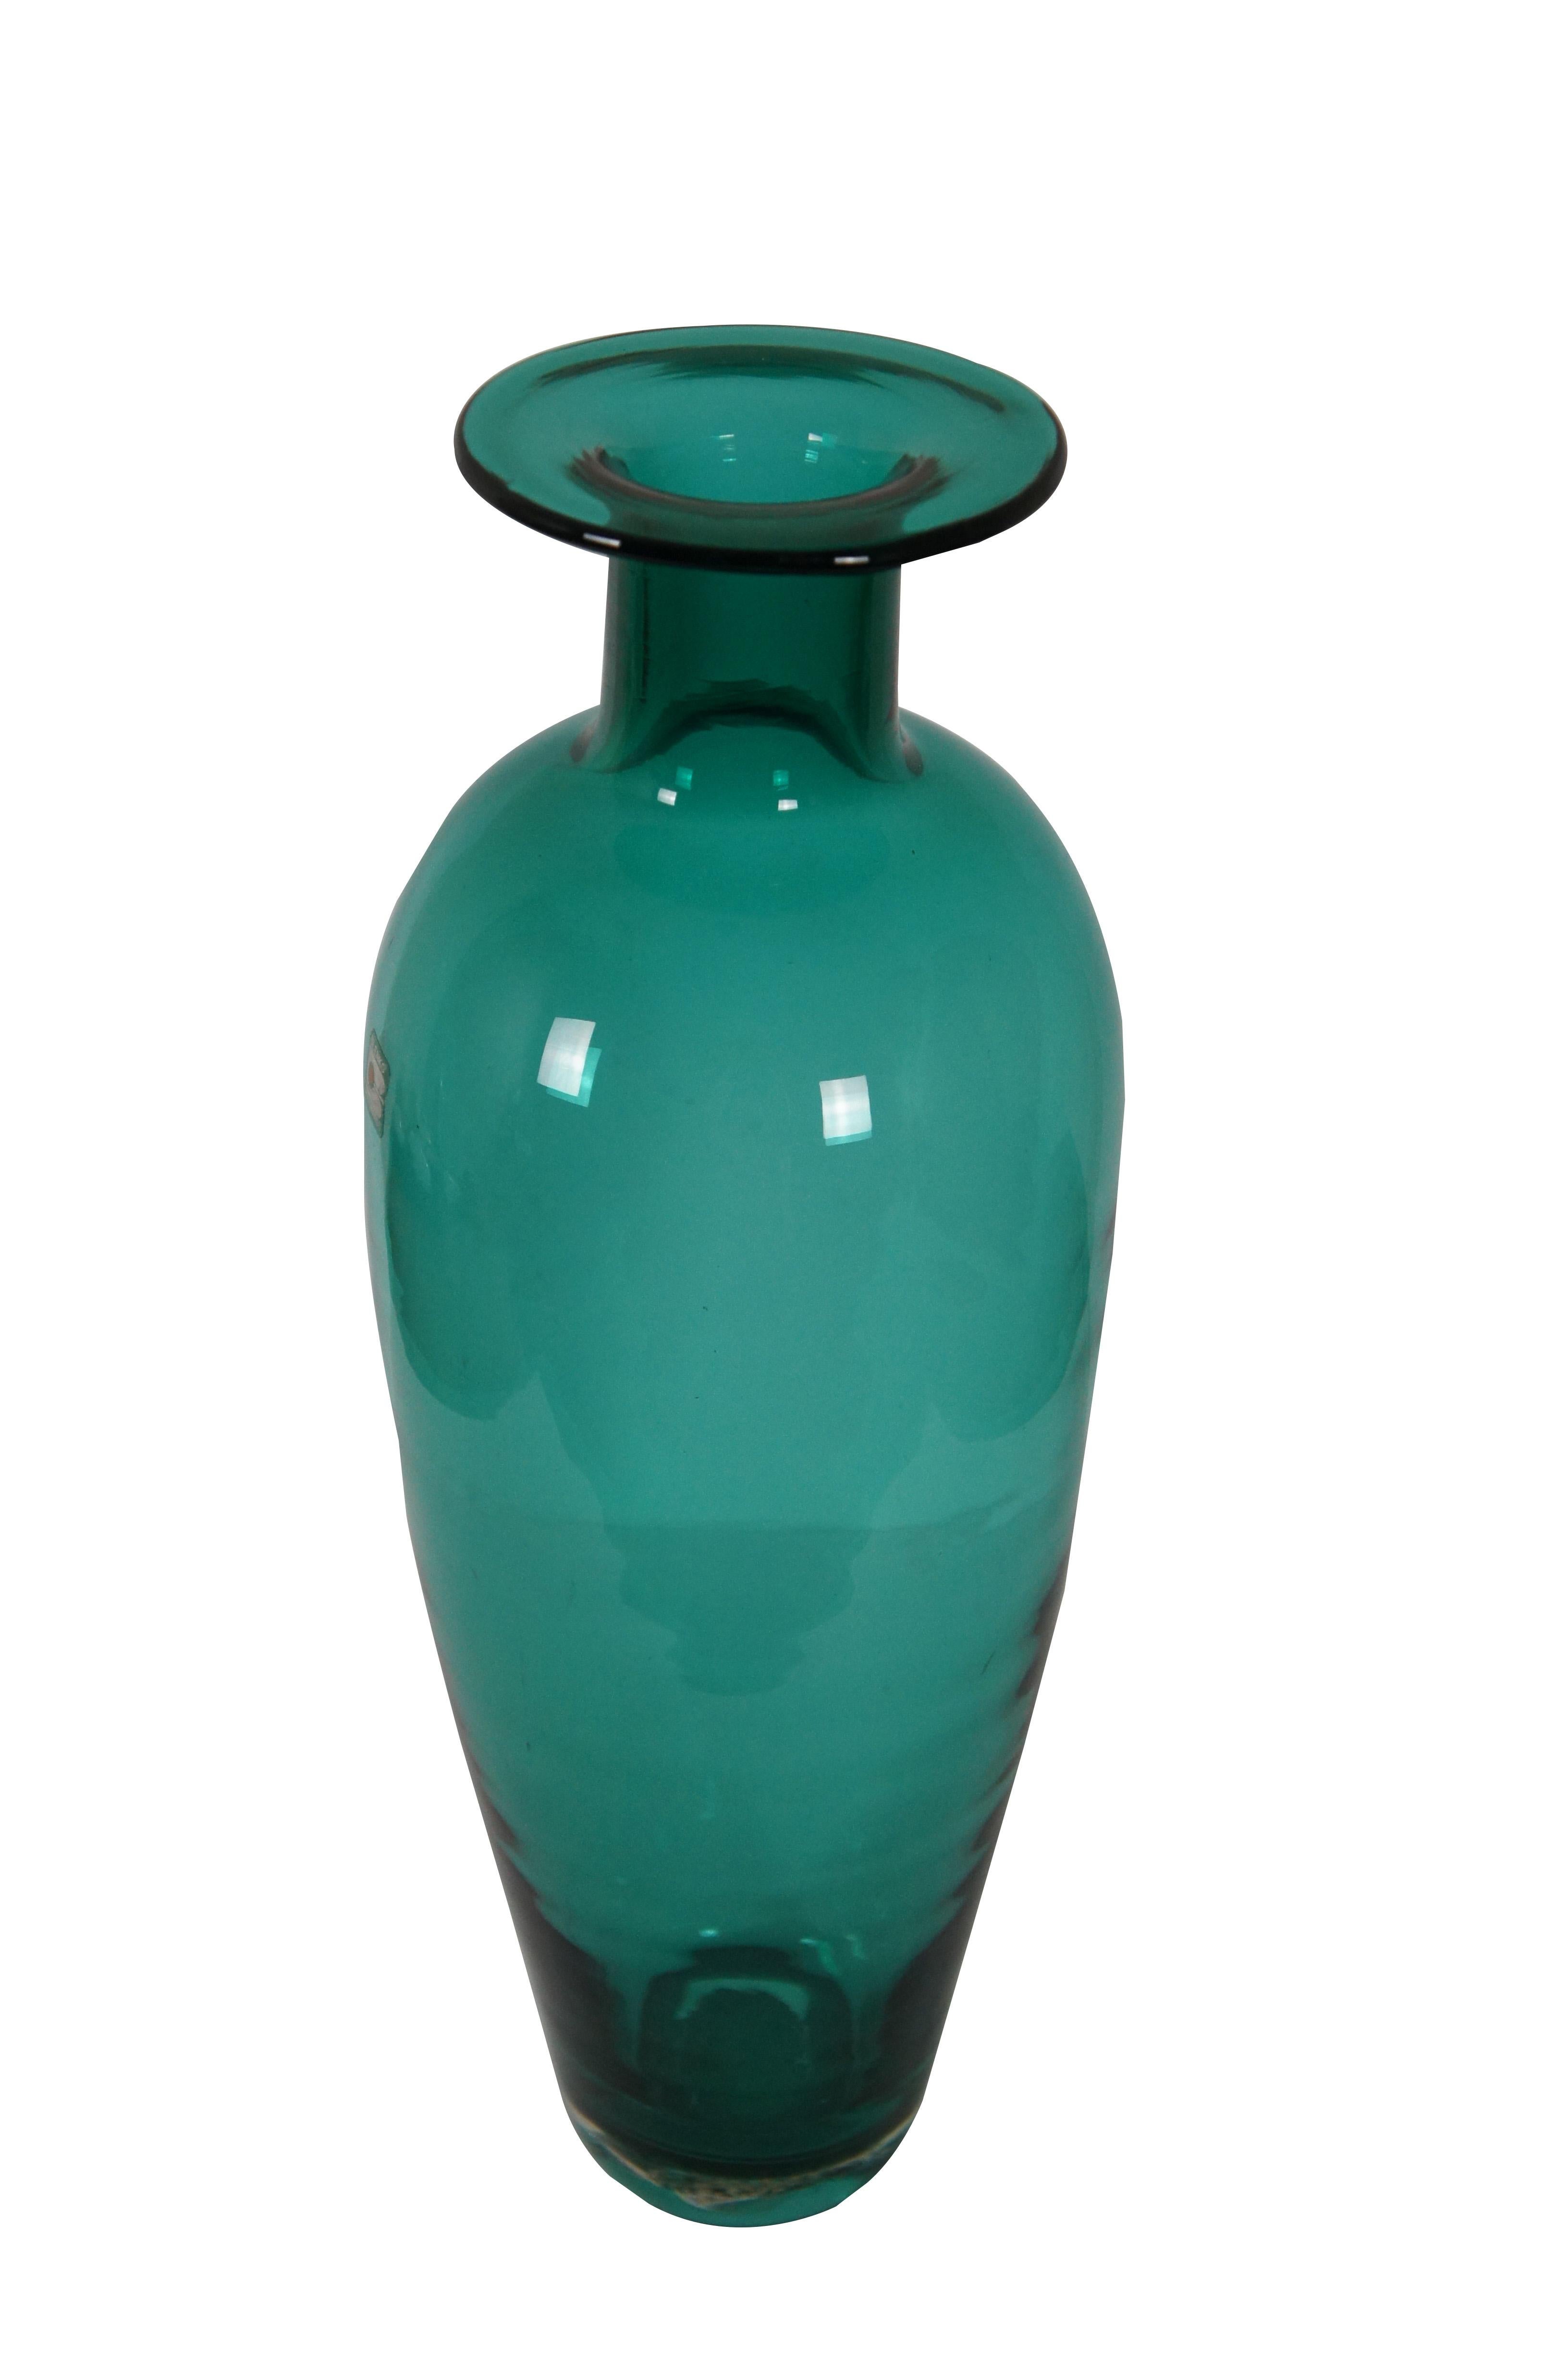 Mid century modern (1960s) large Blenko hand blown emerald green / teal glass vase featuring a rounded body with tapered base, narrower neck, and a flat disc shaped rim. Original sticker on side.

Dimensions:
7” x 18.75” (Diameter x Height)